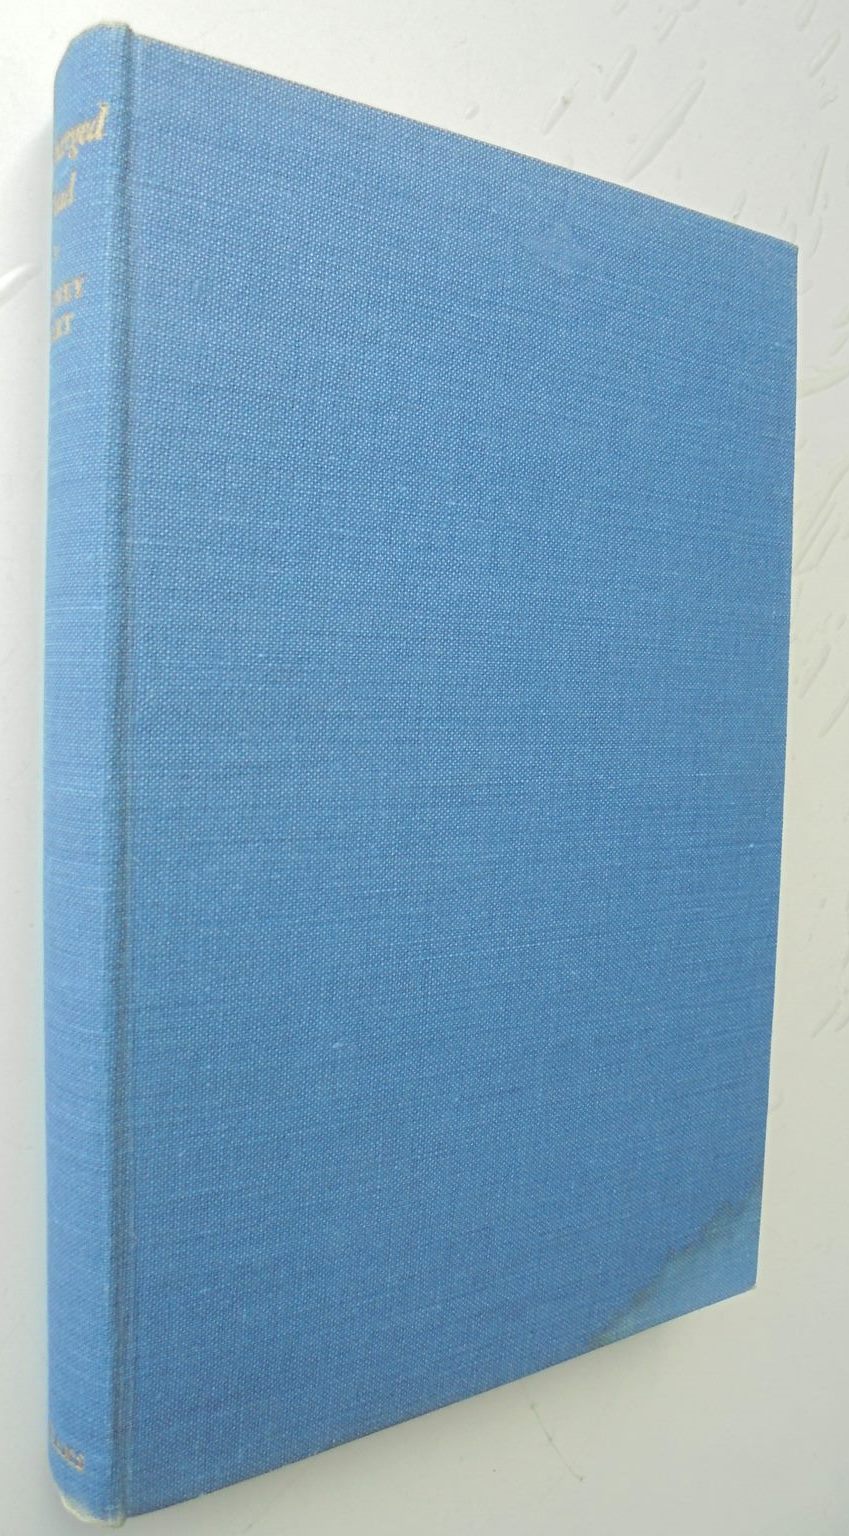 Discharged Dead - wartime adventures of a submariner. 1st edition